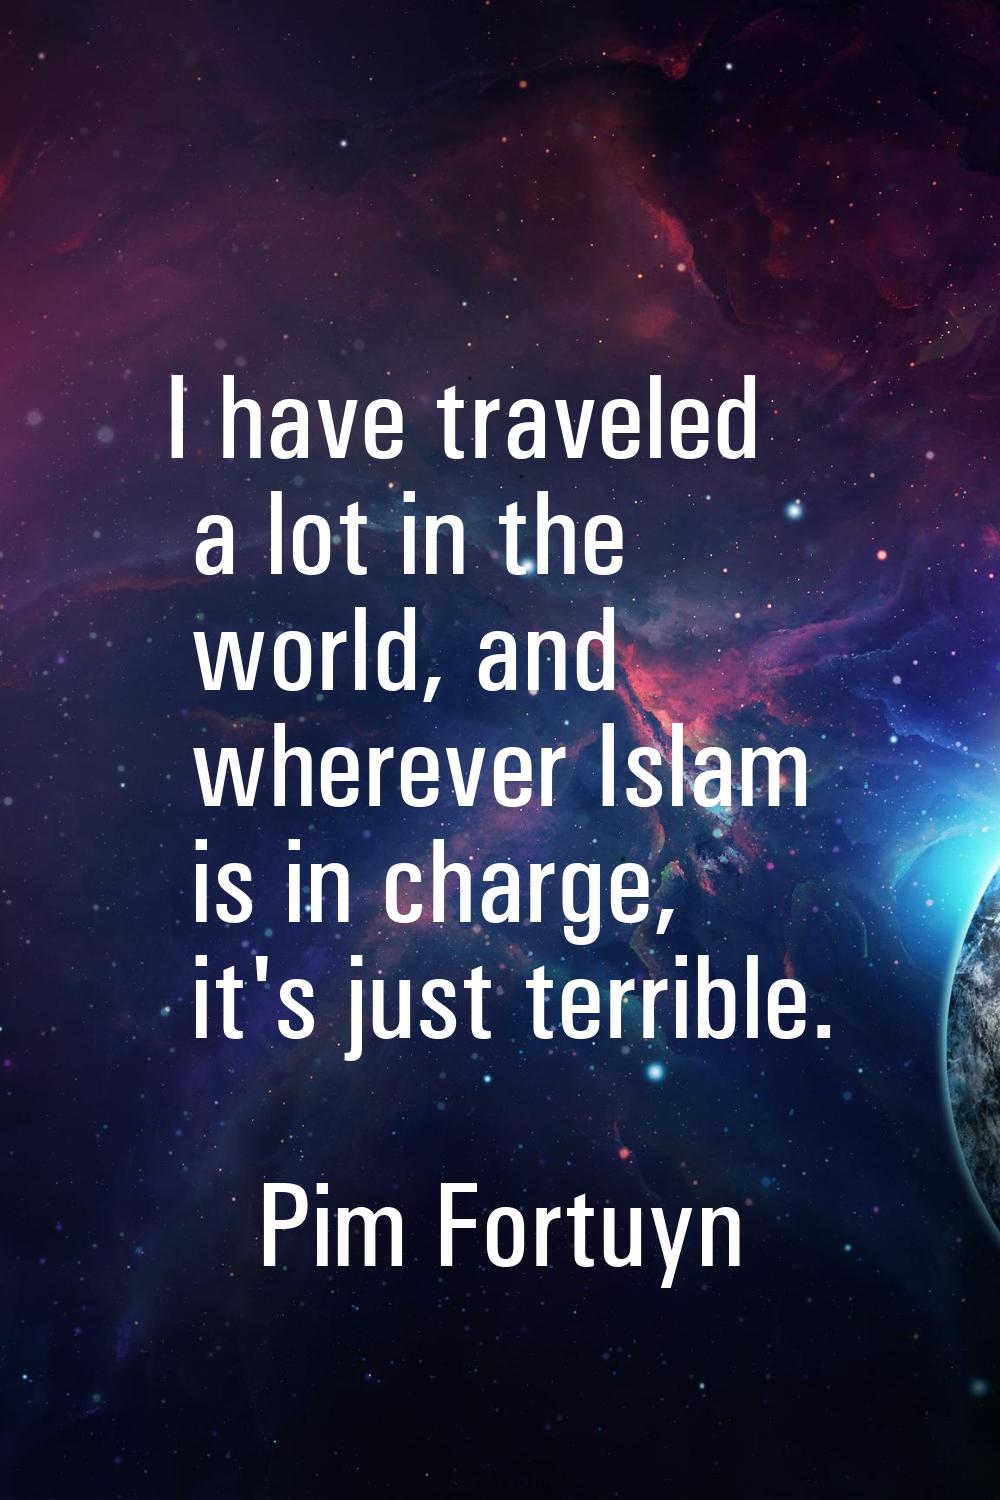 I have traveled a lot in the world, and wherever Islam is in charge, it's just terrible.